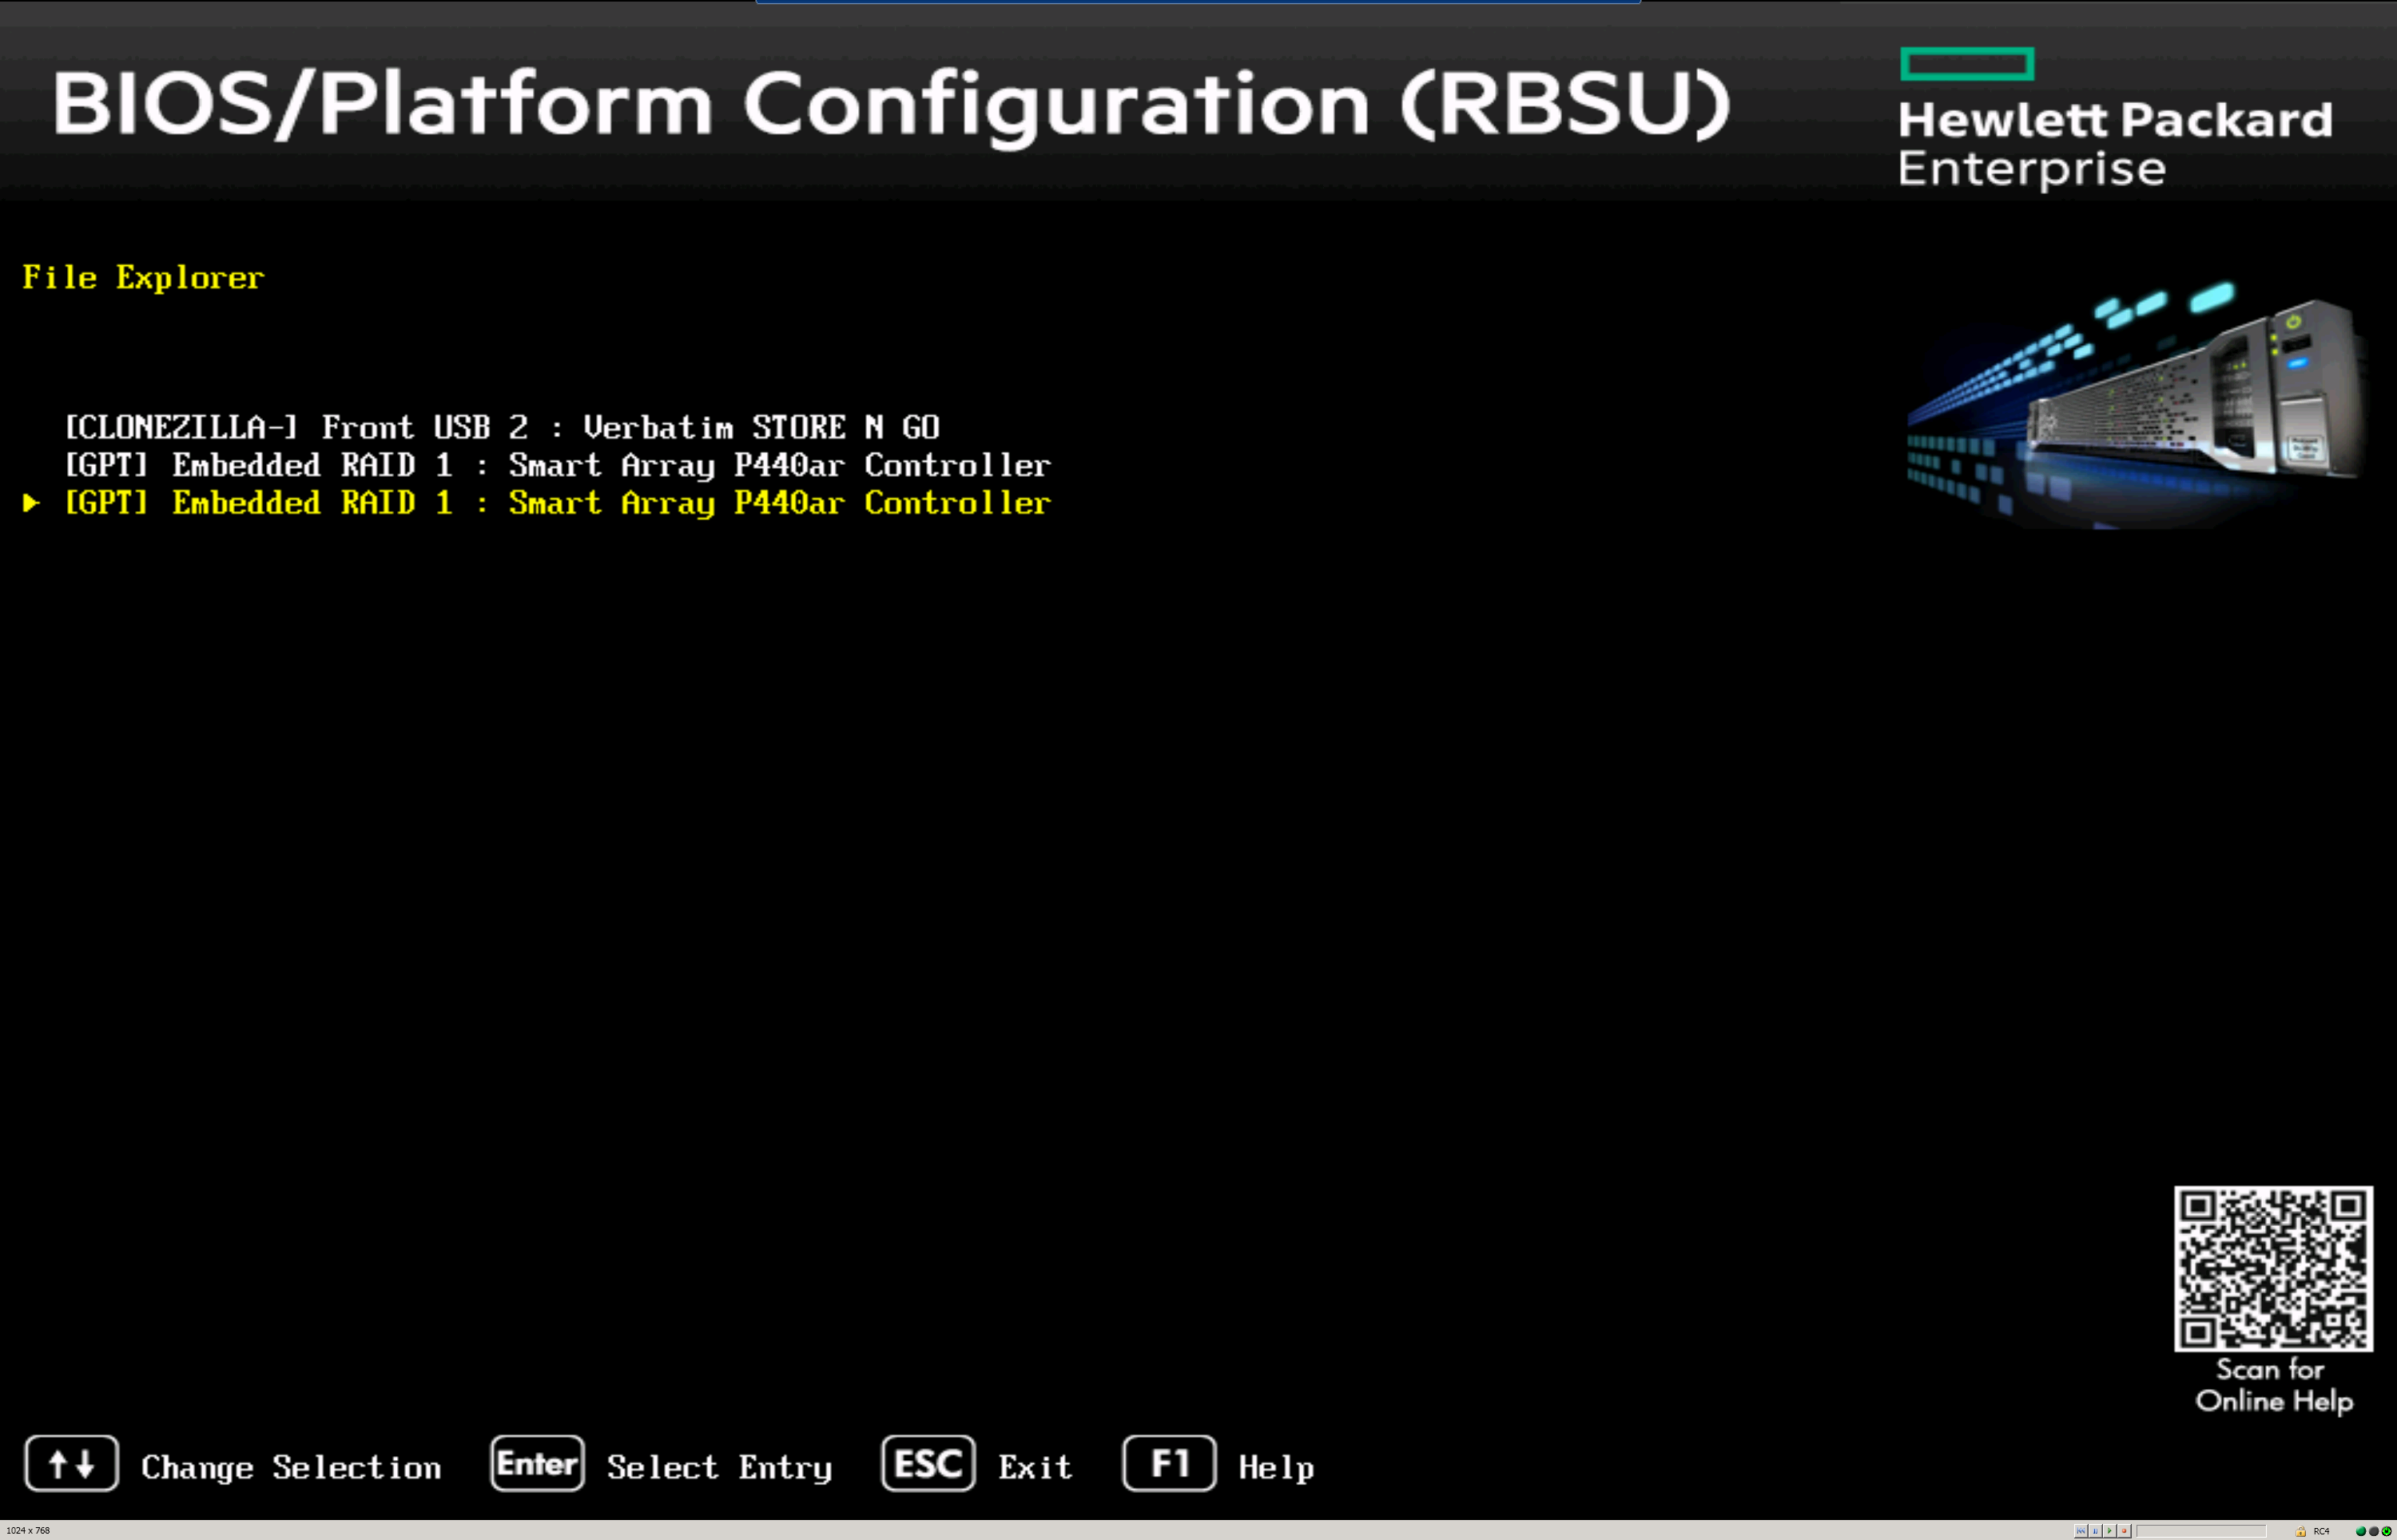 Move over from SAS HDD to SATA SSD with HPE SSA, C... - Hewlett Packard  Enterprise Community